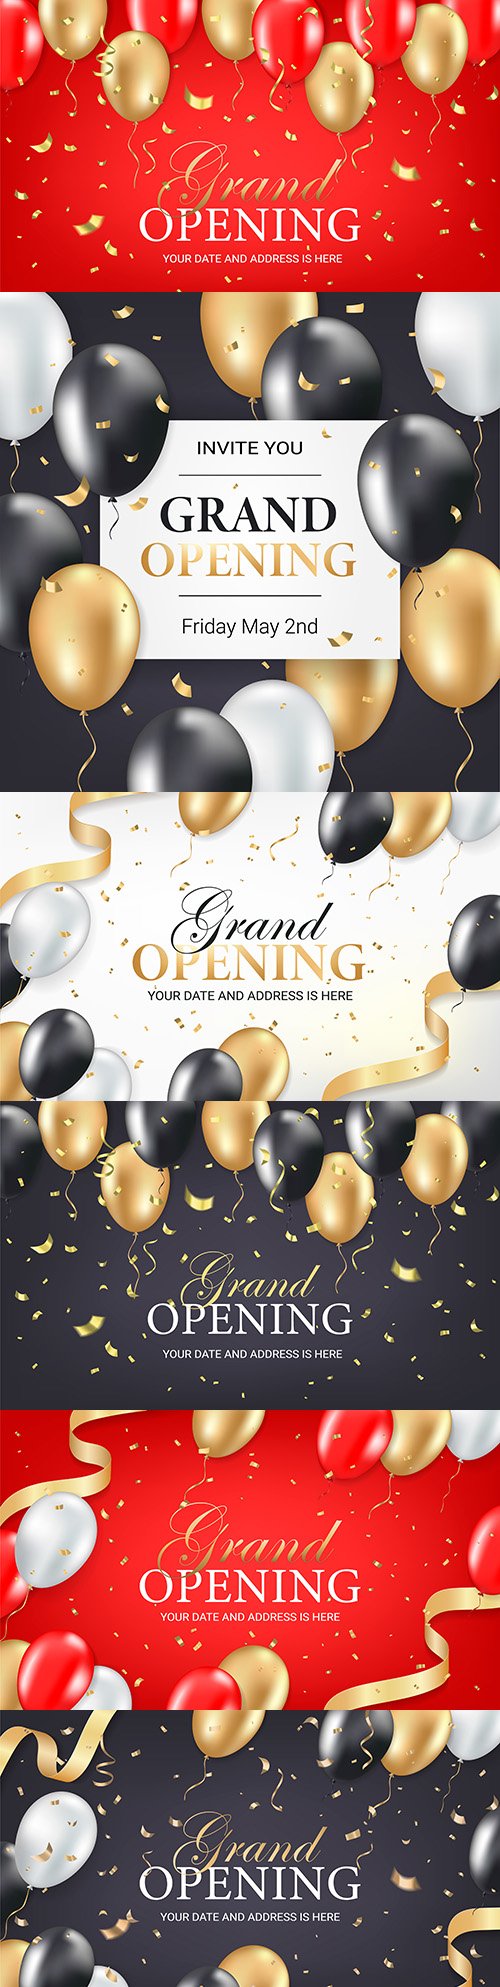 Grand opening design invitation ticket with balls